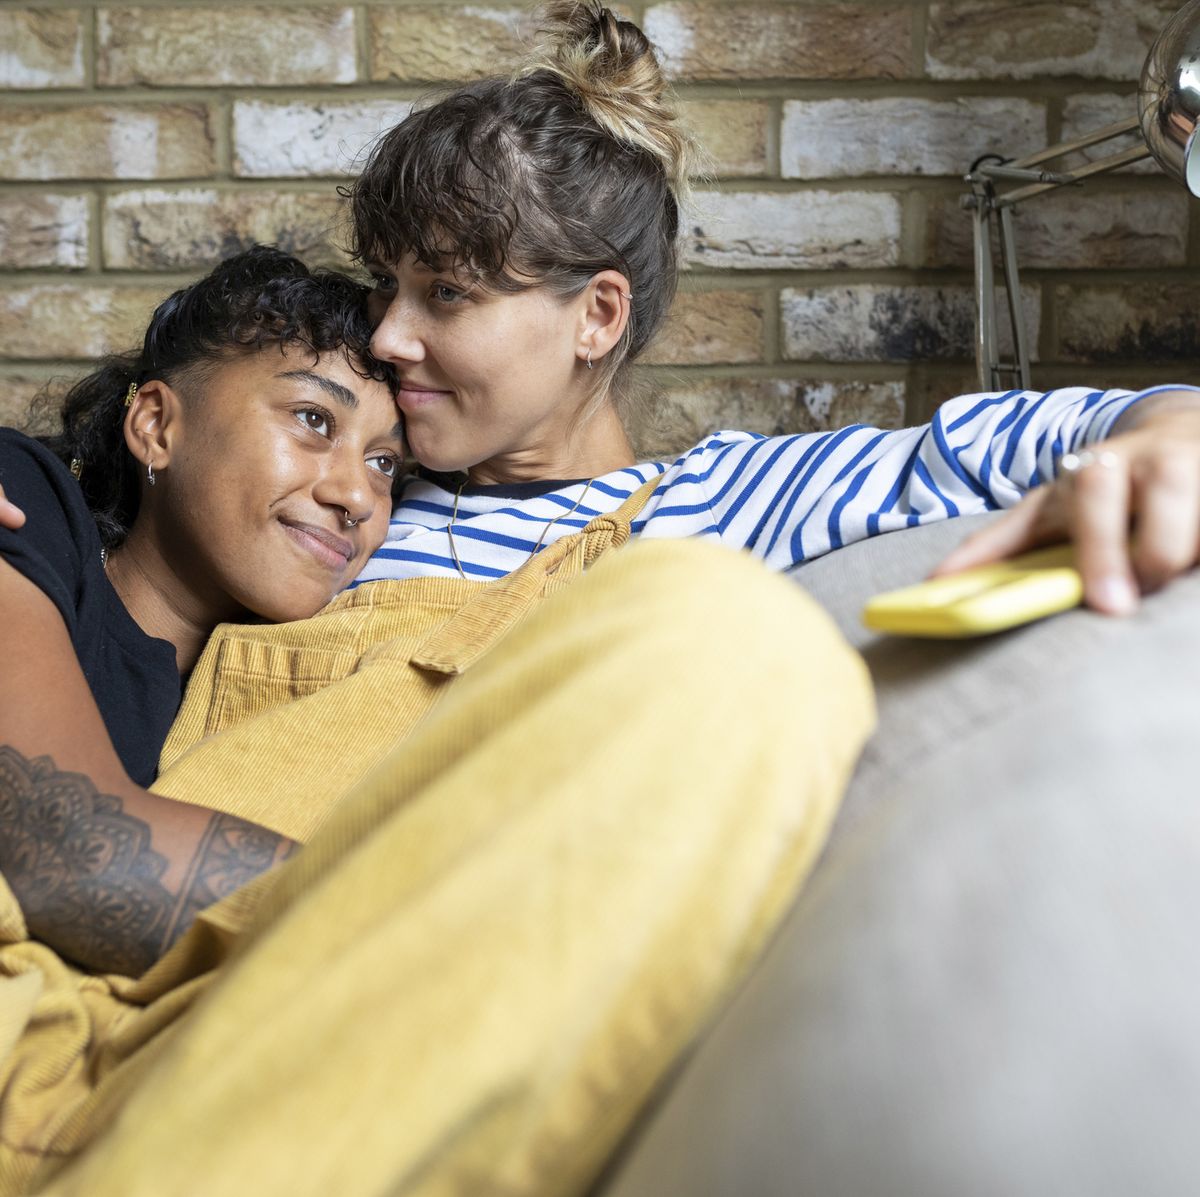 Naked Married Lesbians - Am I a lesbian? How to know if you're a lesbian